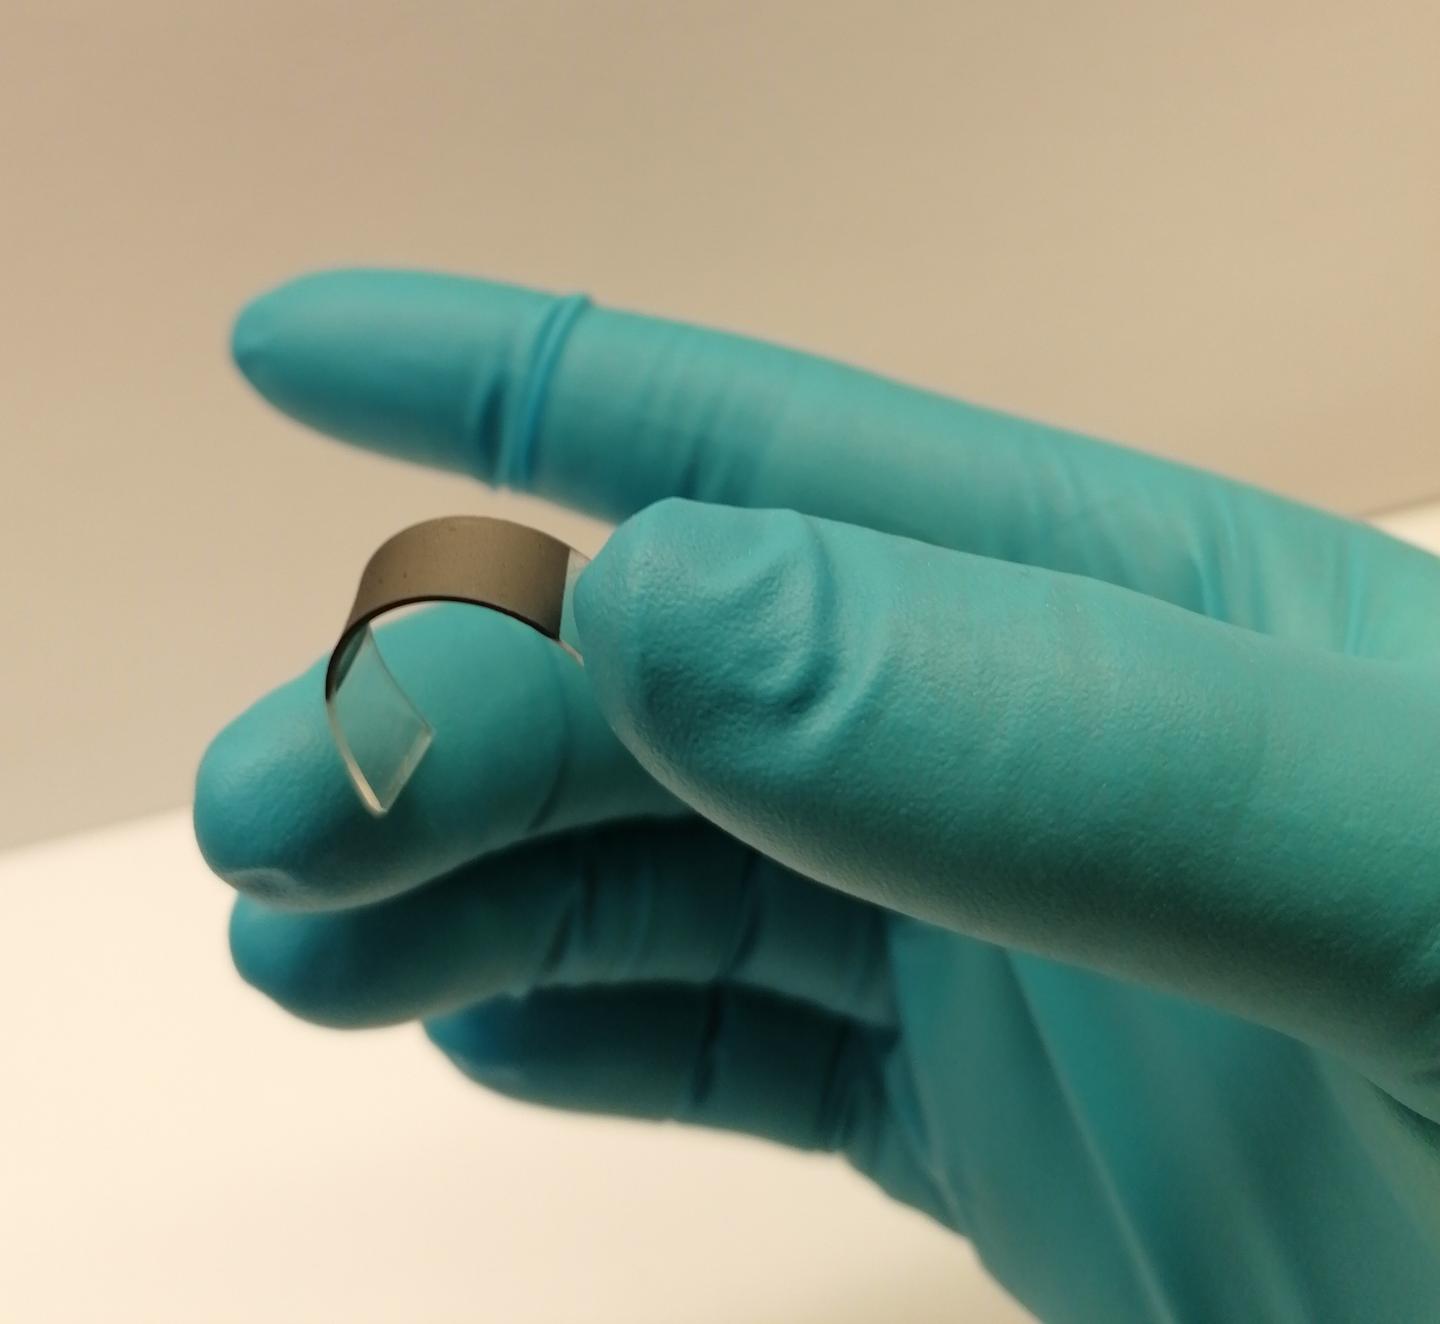 Sussex Researcher Holds a Self-Adhering Medical Patch Made from Scalably Printed Graphene Layer